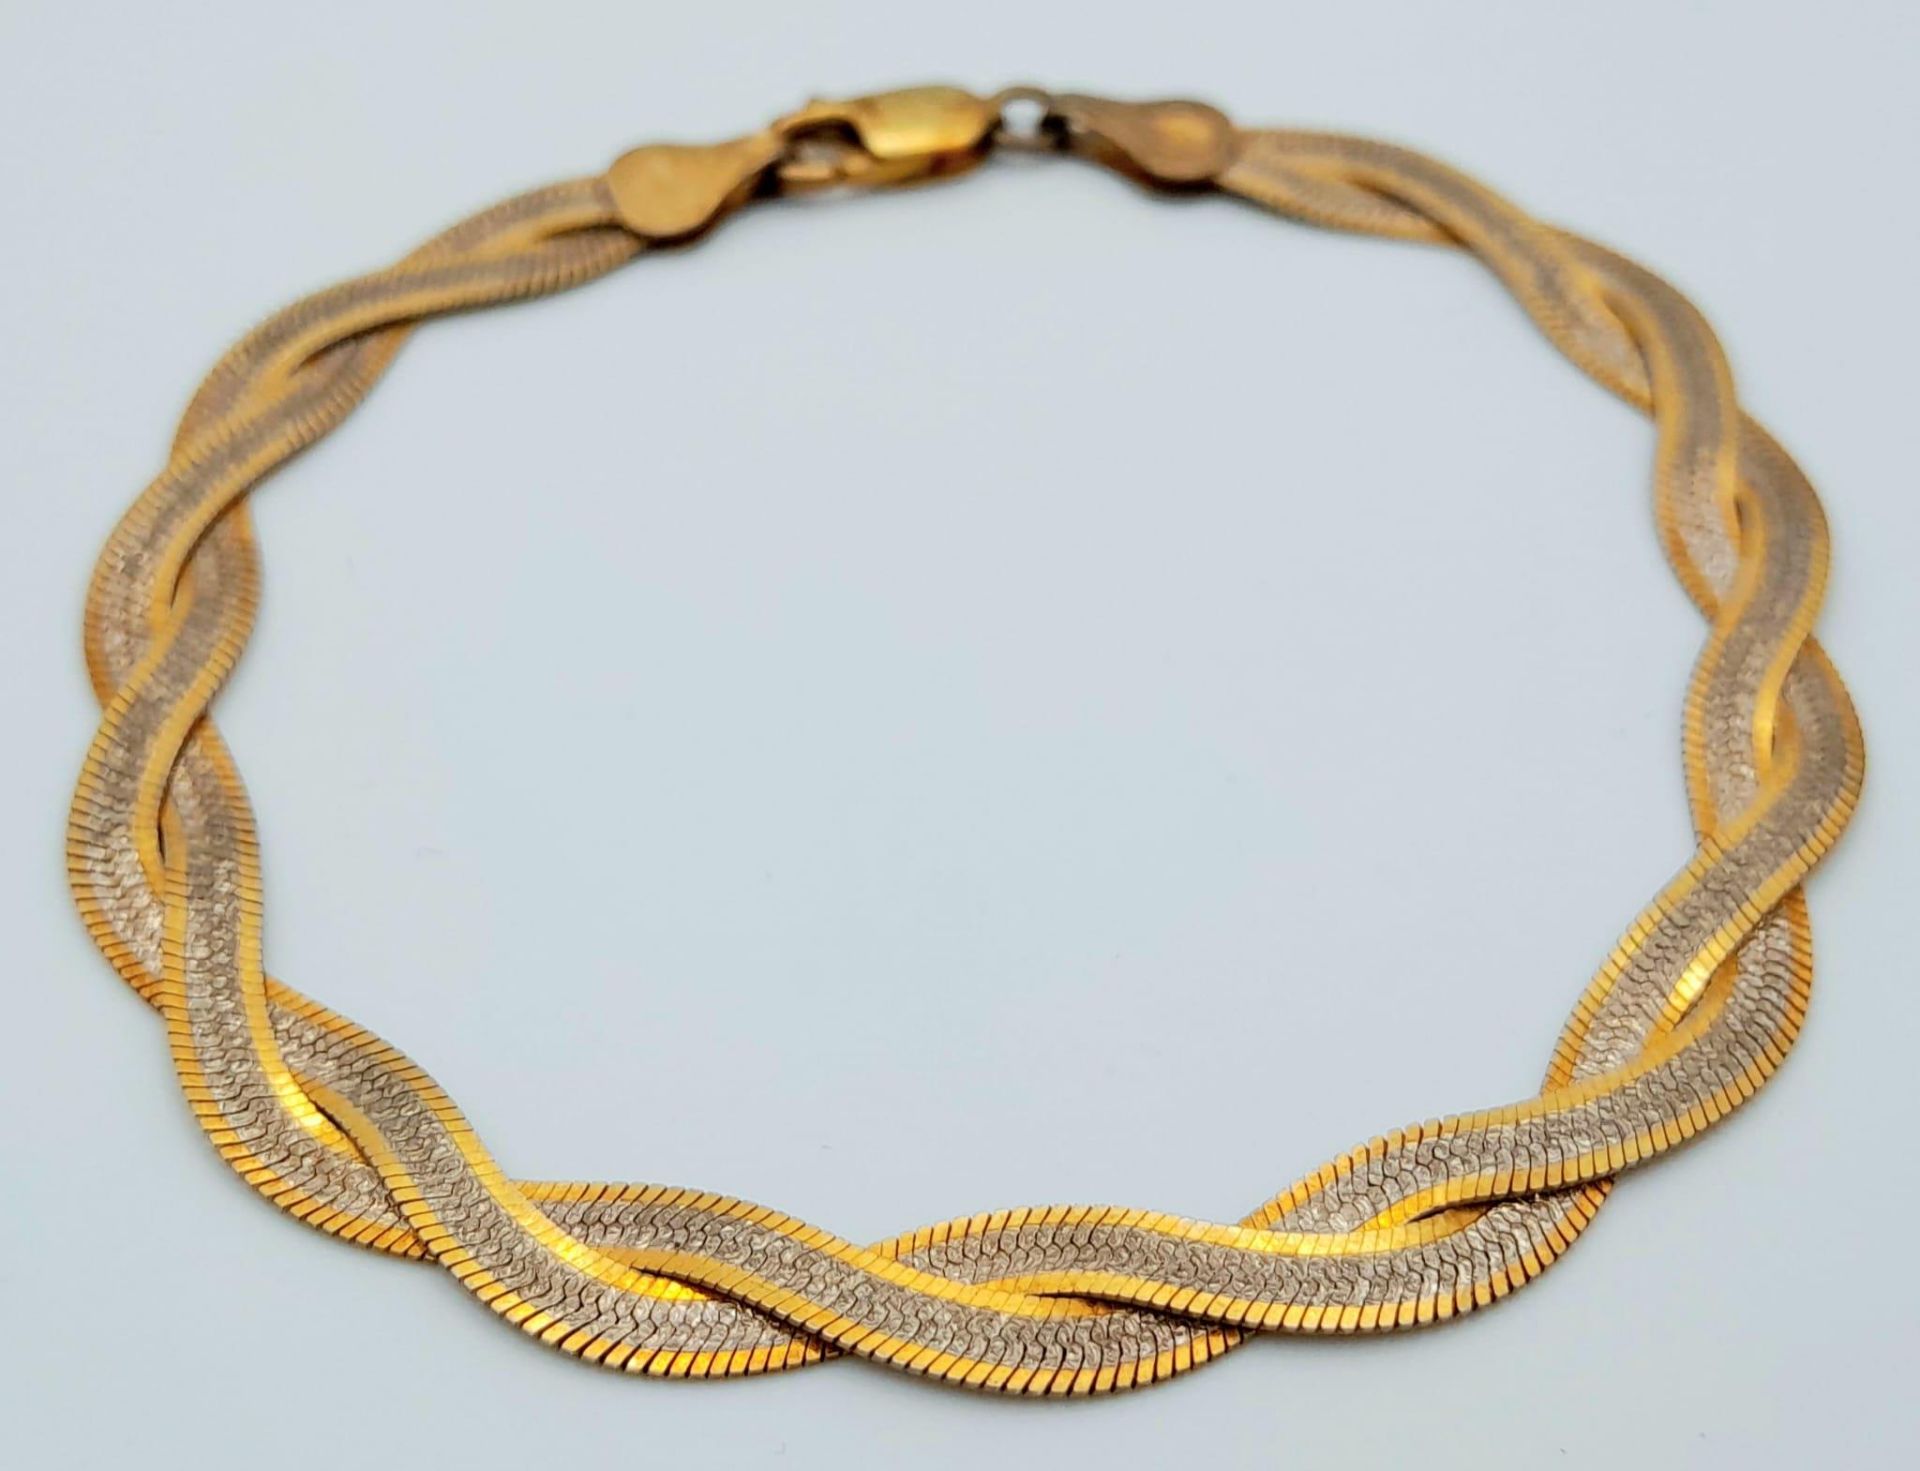 A 925 Sterling Silver Gilded and White Interwoven Flat Bracelet. 16cm. - Image 3 of 9